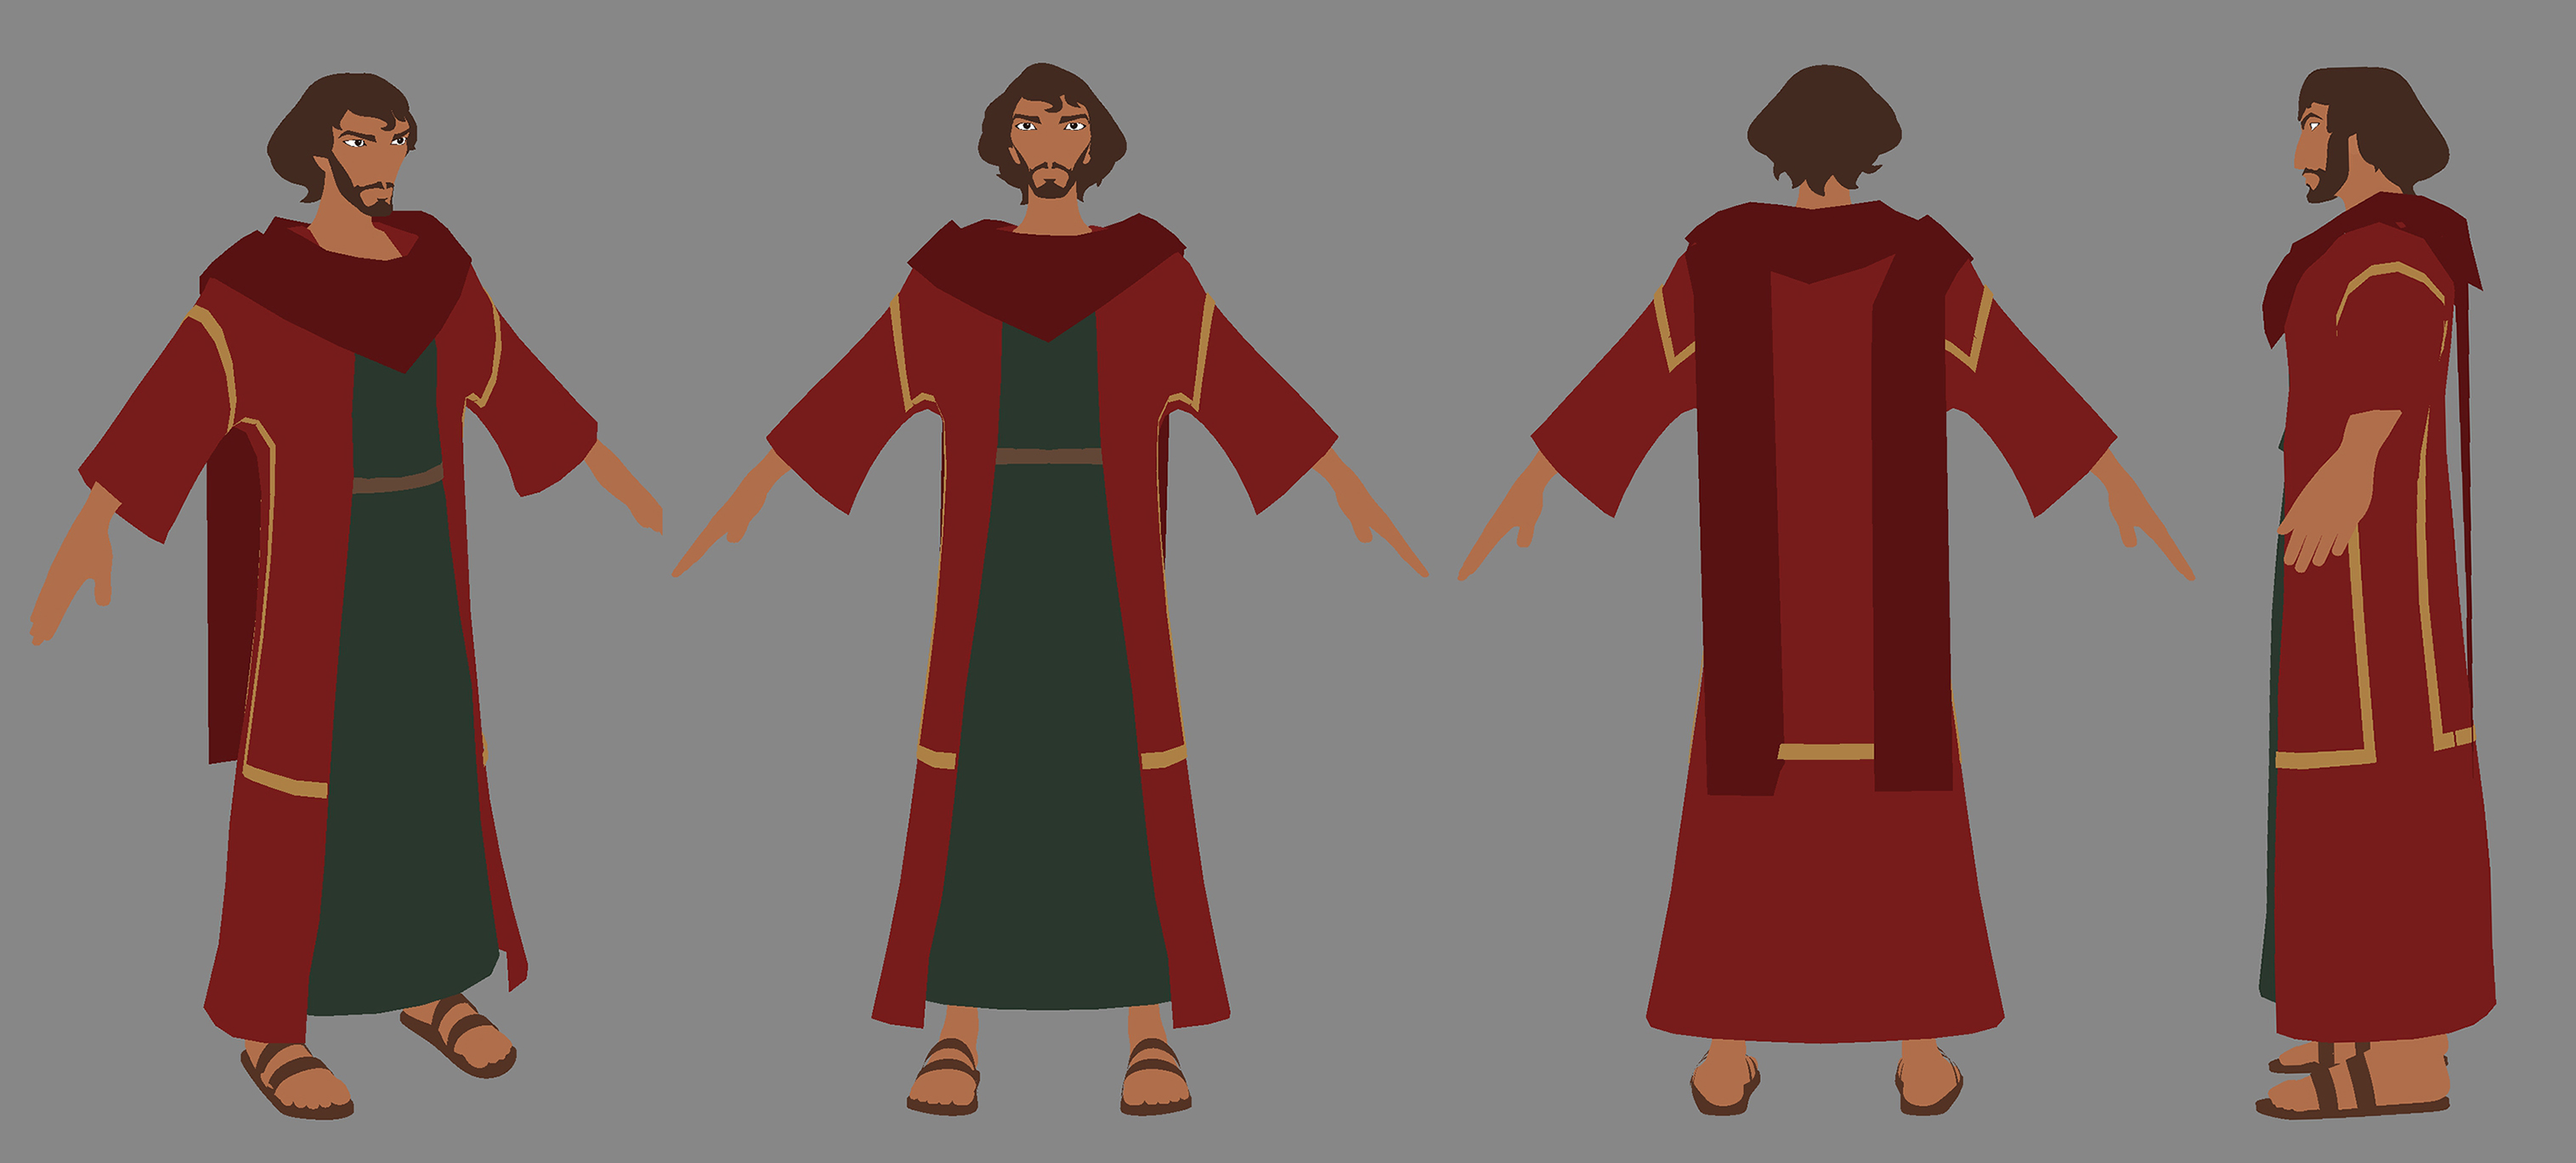 moses body flat color.jpg